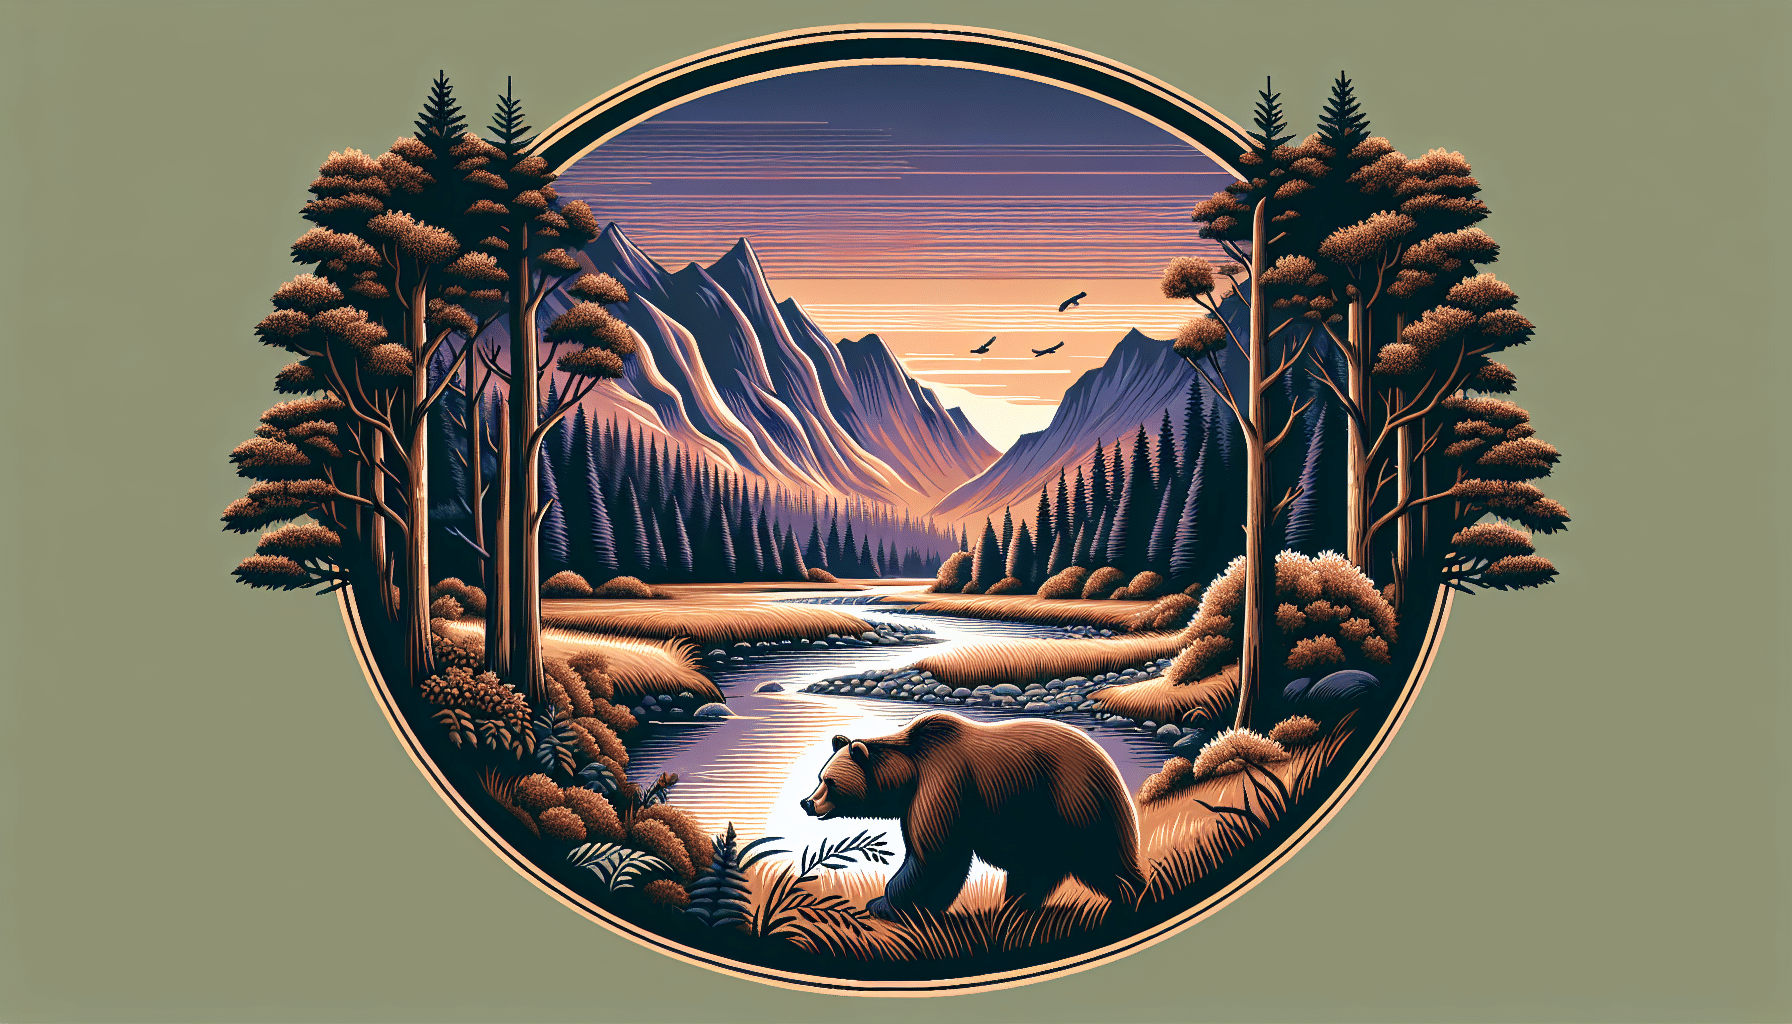 An illustrative representation of the habitat of brown bears. The scene features dense forests branching out to open meadows and a rugged mountainous background. A serene river cuts across the scene. A solitary brown bear seems to be wandering around, exploring its surroundings. There are no human beings, text, or brand logos in the image. The sky is a mix of oranges and purples, depicting either a sunrise or sunset. The overall image emphasizes the tranquil and isolated territories where brown bears typically reside.